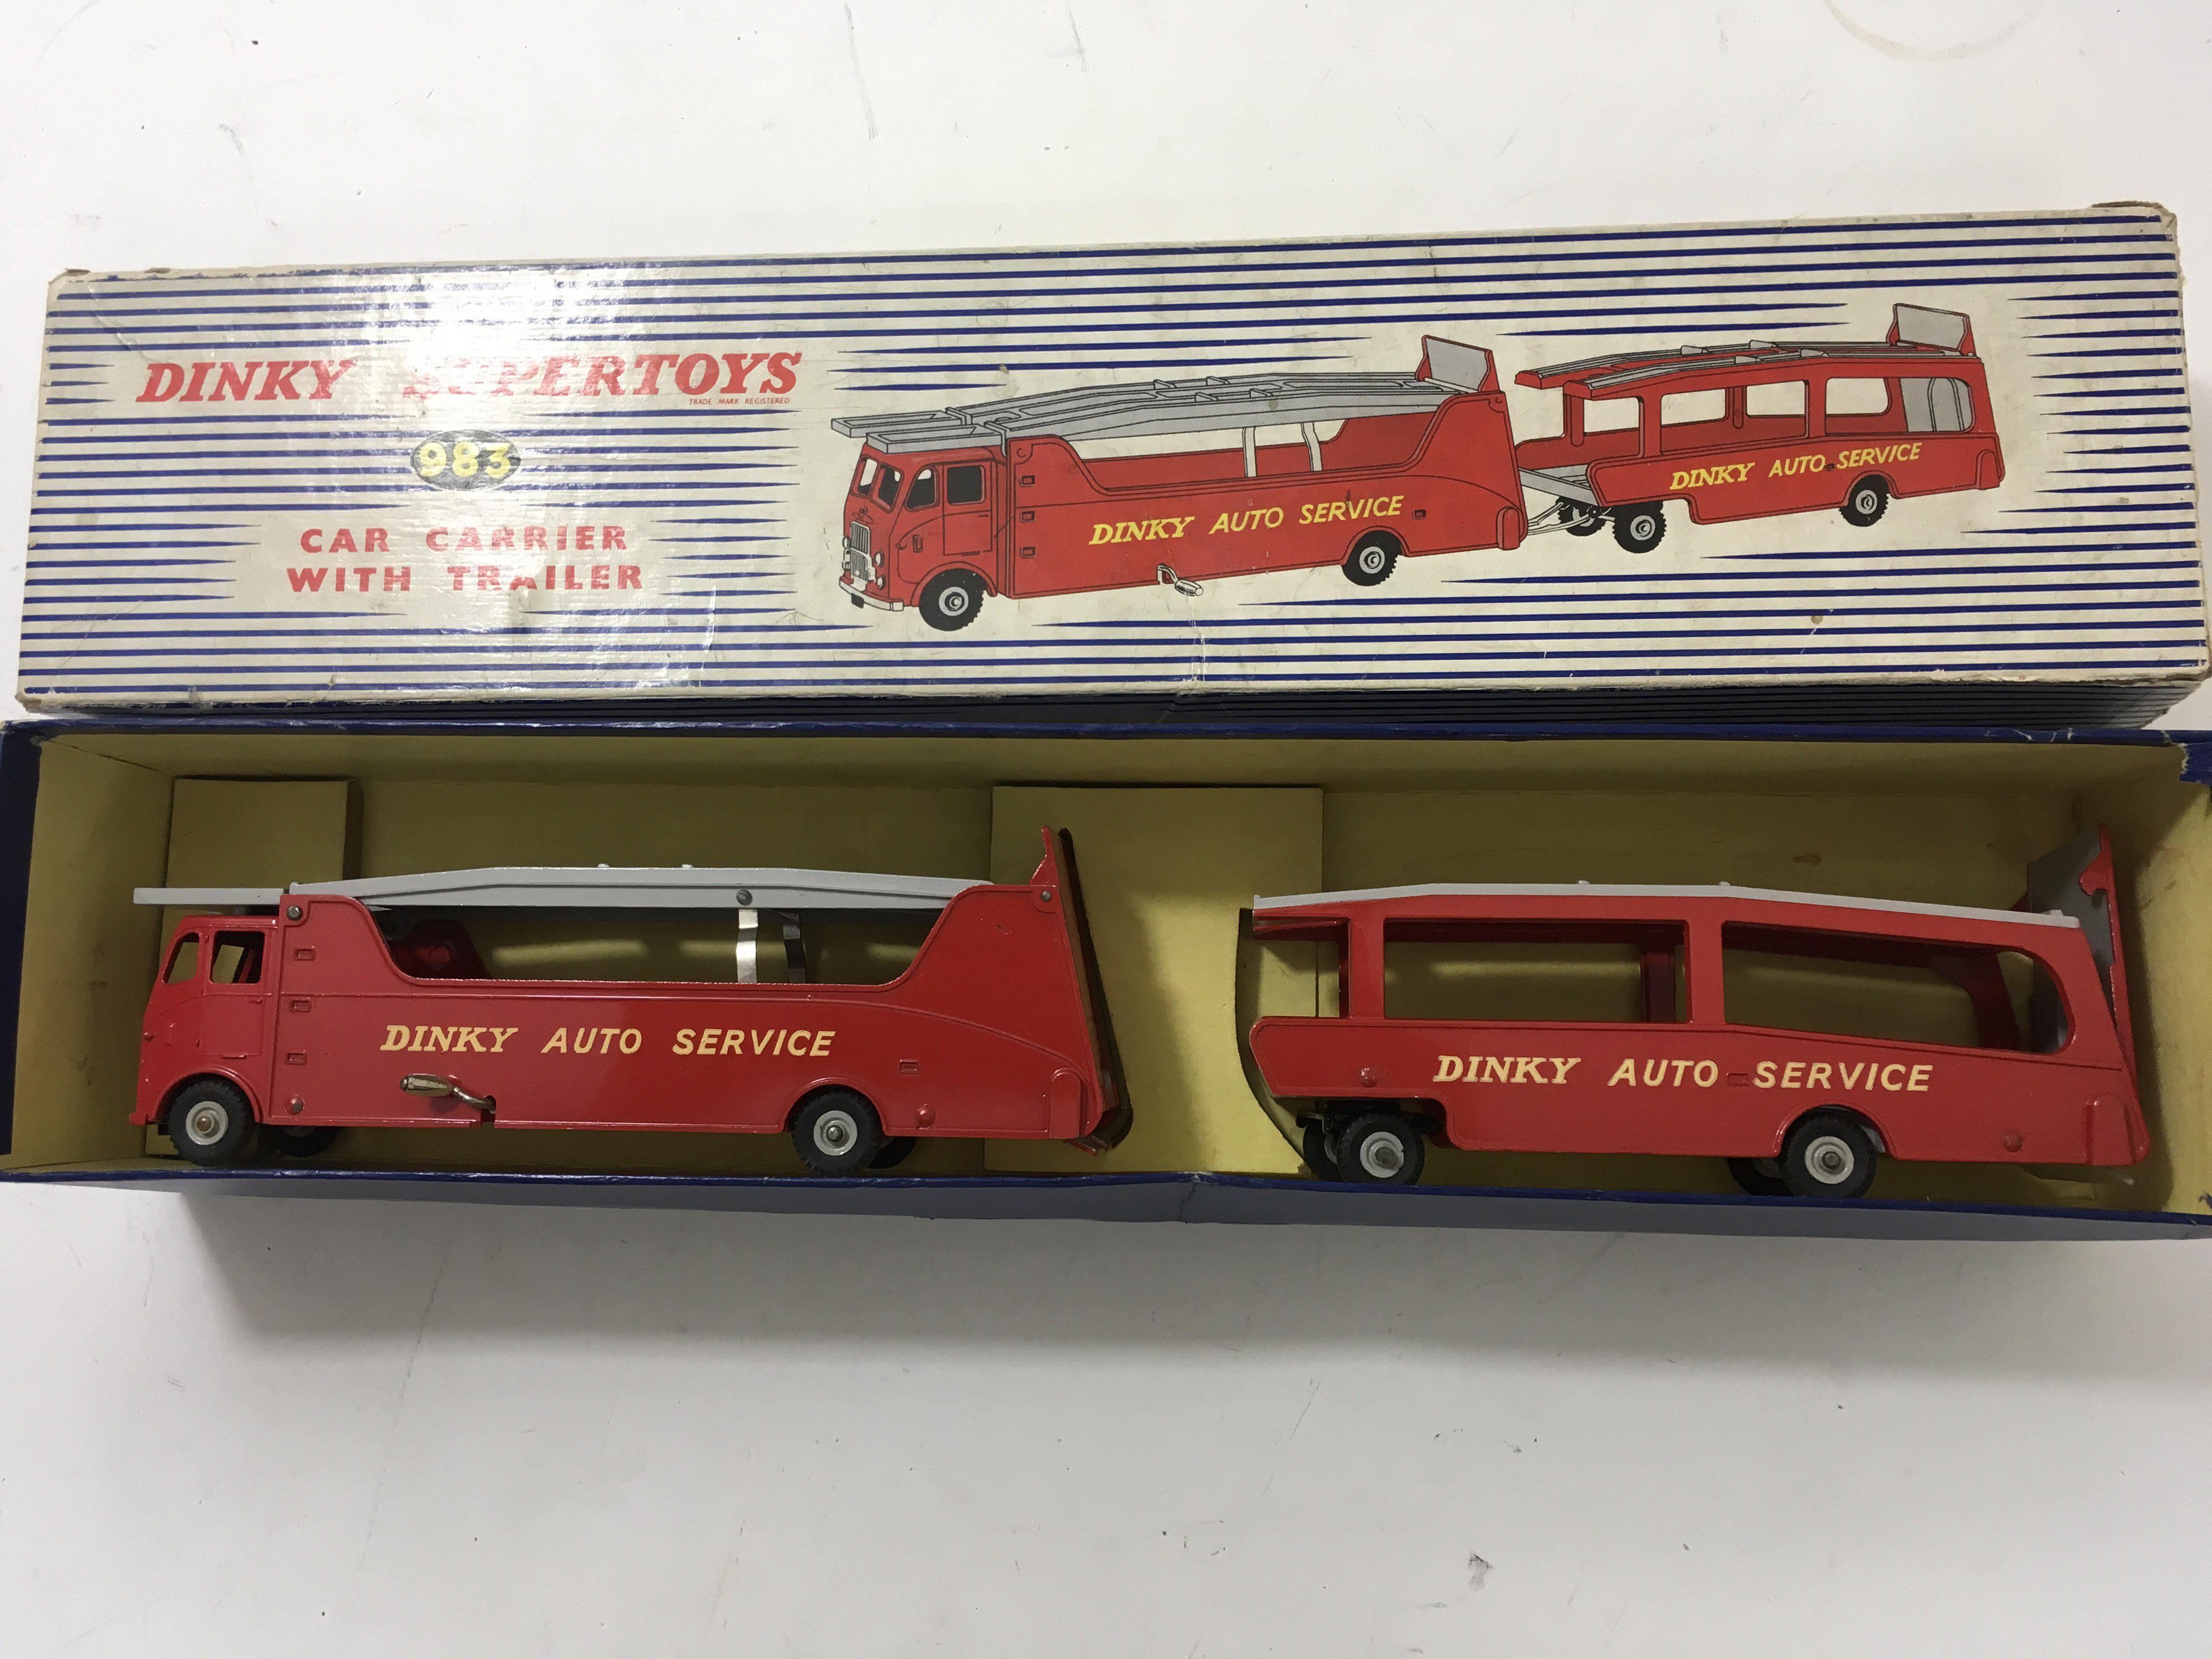 A Dinky Supertoys car carrier with trailer No 983. - Image 3 of 3